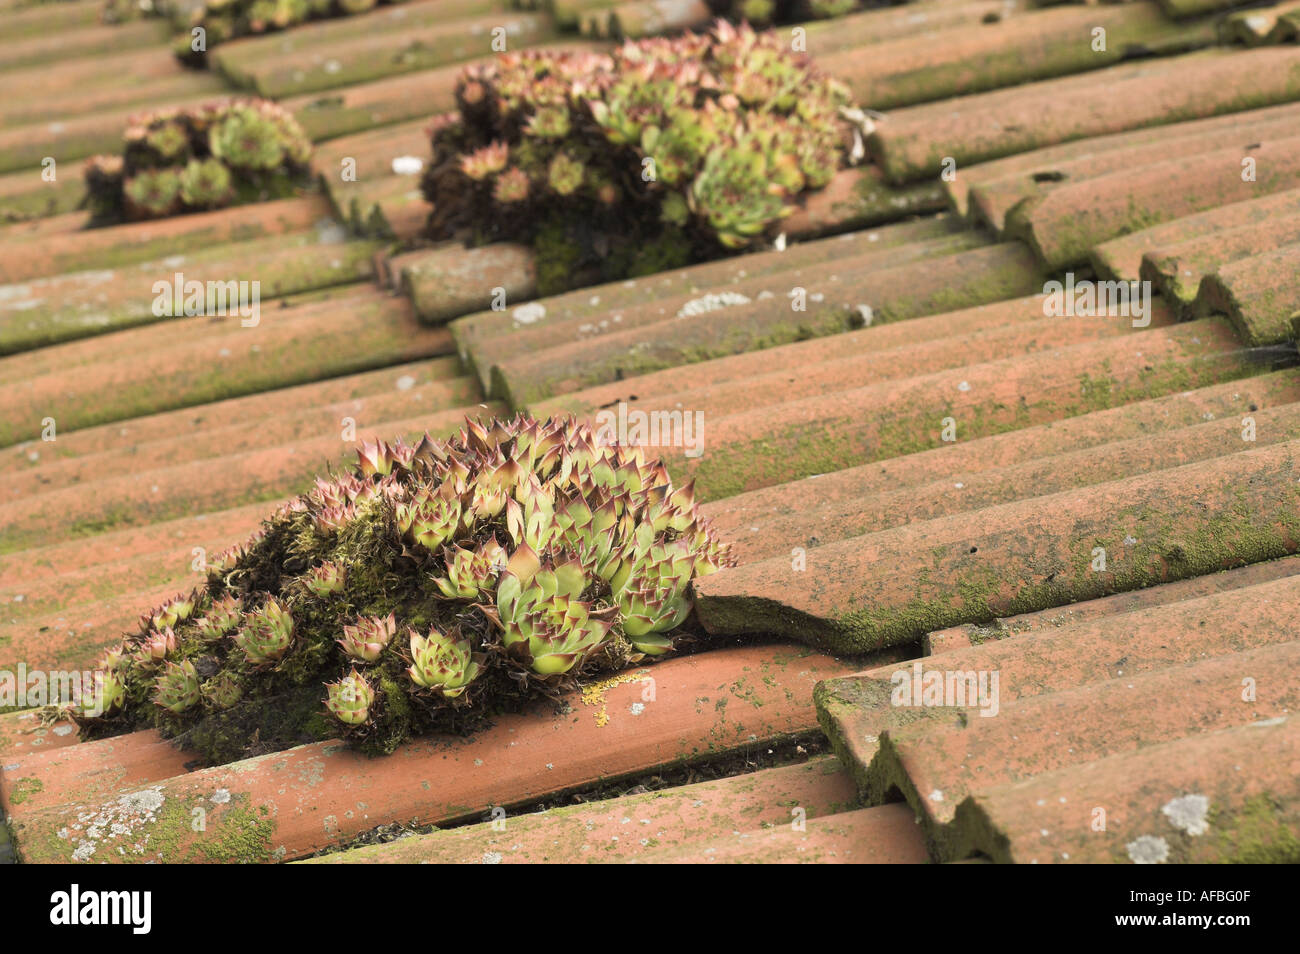 House leeks on old tiled roof Uk August Stock Photo